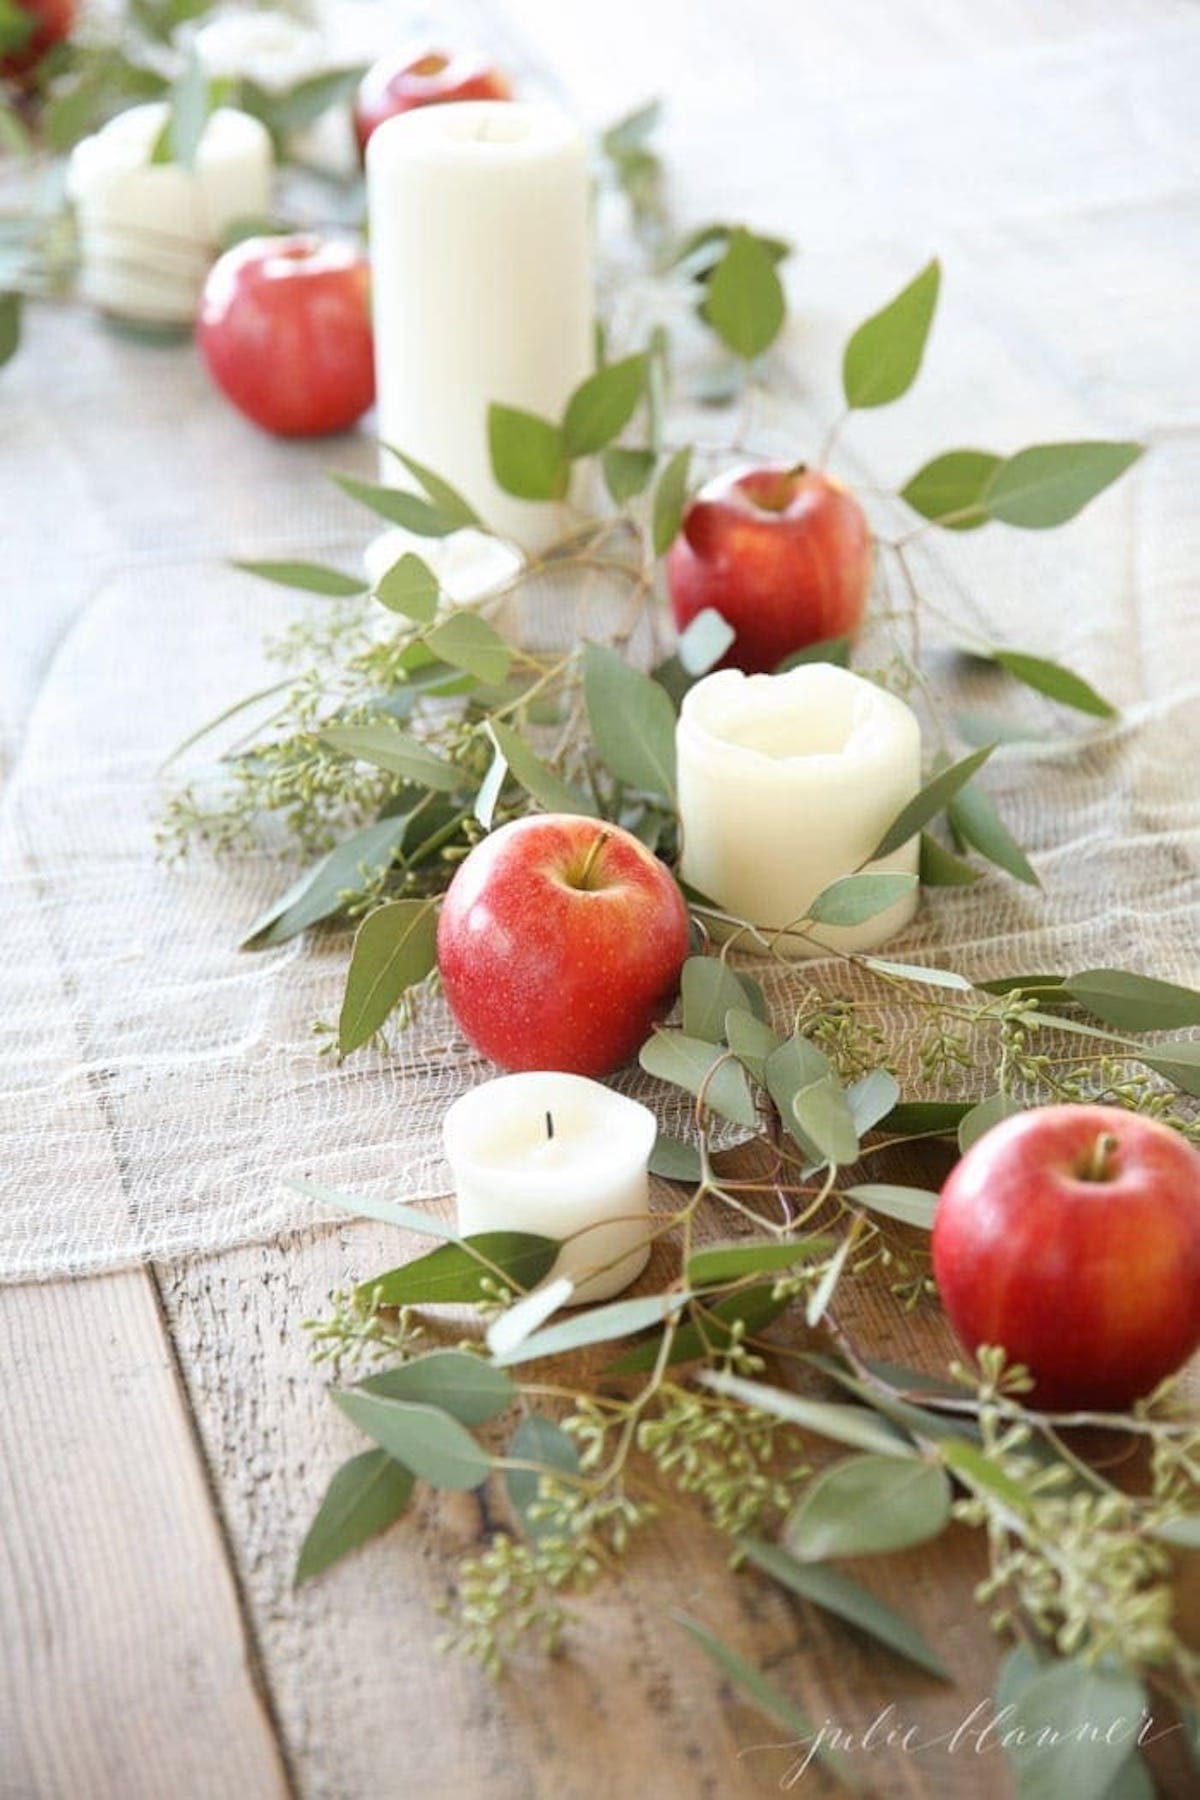 A Thanksgiving table with apples, eucalyptus, and candles.